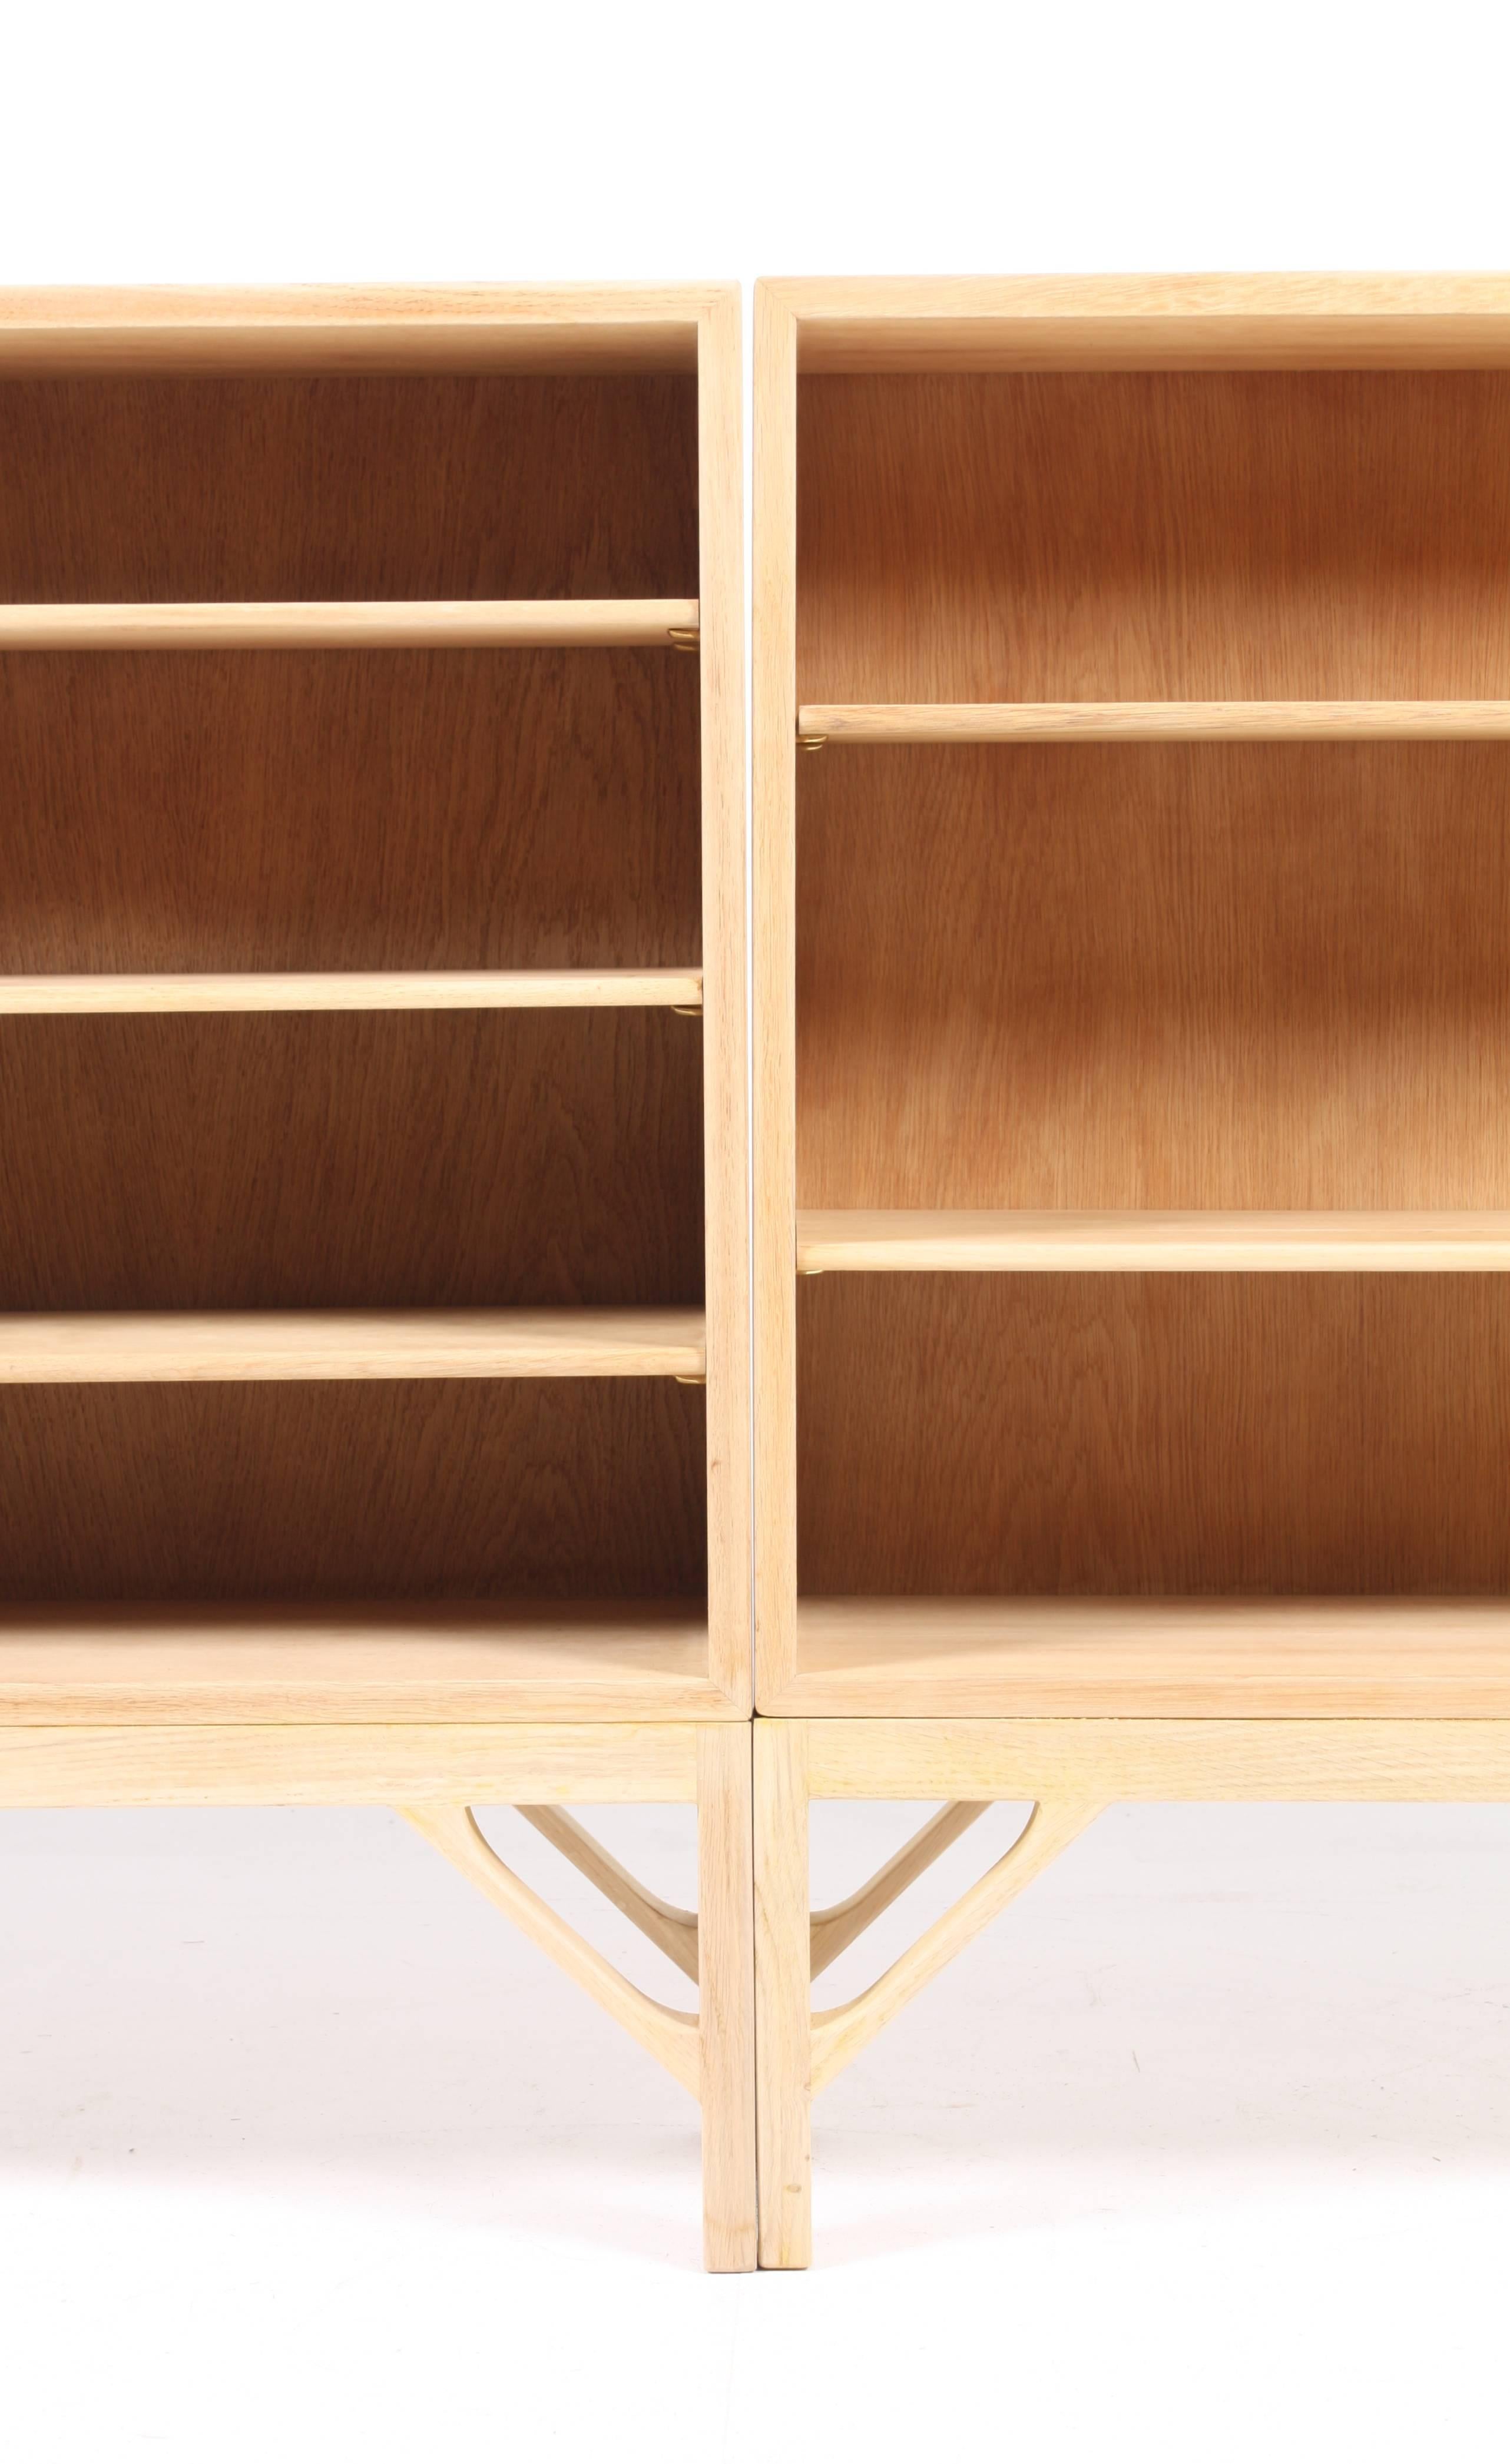 Pair of pristine bookcases with adjustable shelves in white soap finished Scandinavian oak designed by Maa. Børge Mogensen for C.M. Madsen cabinetmakers in 1958. Made in Denmark in the 1960s. Great condition.